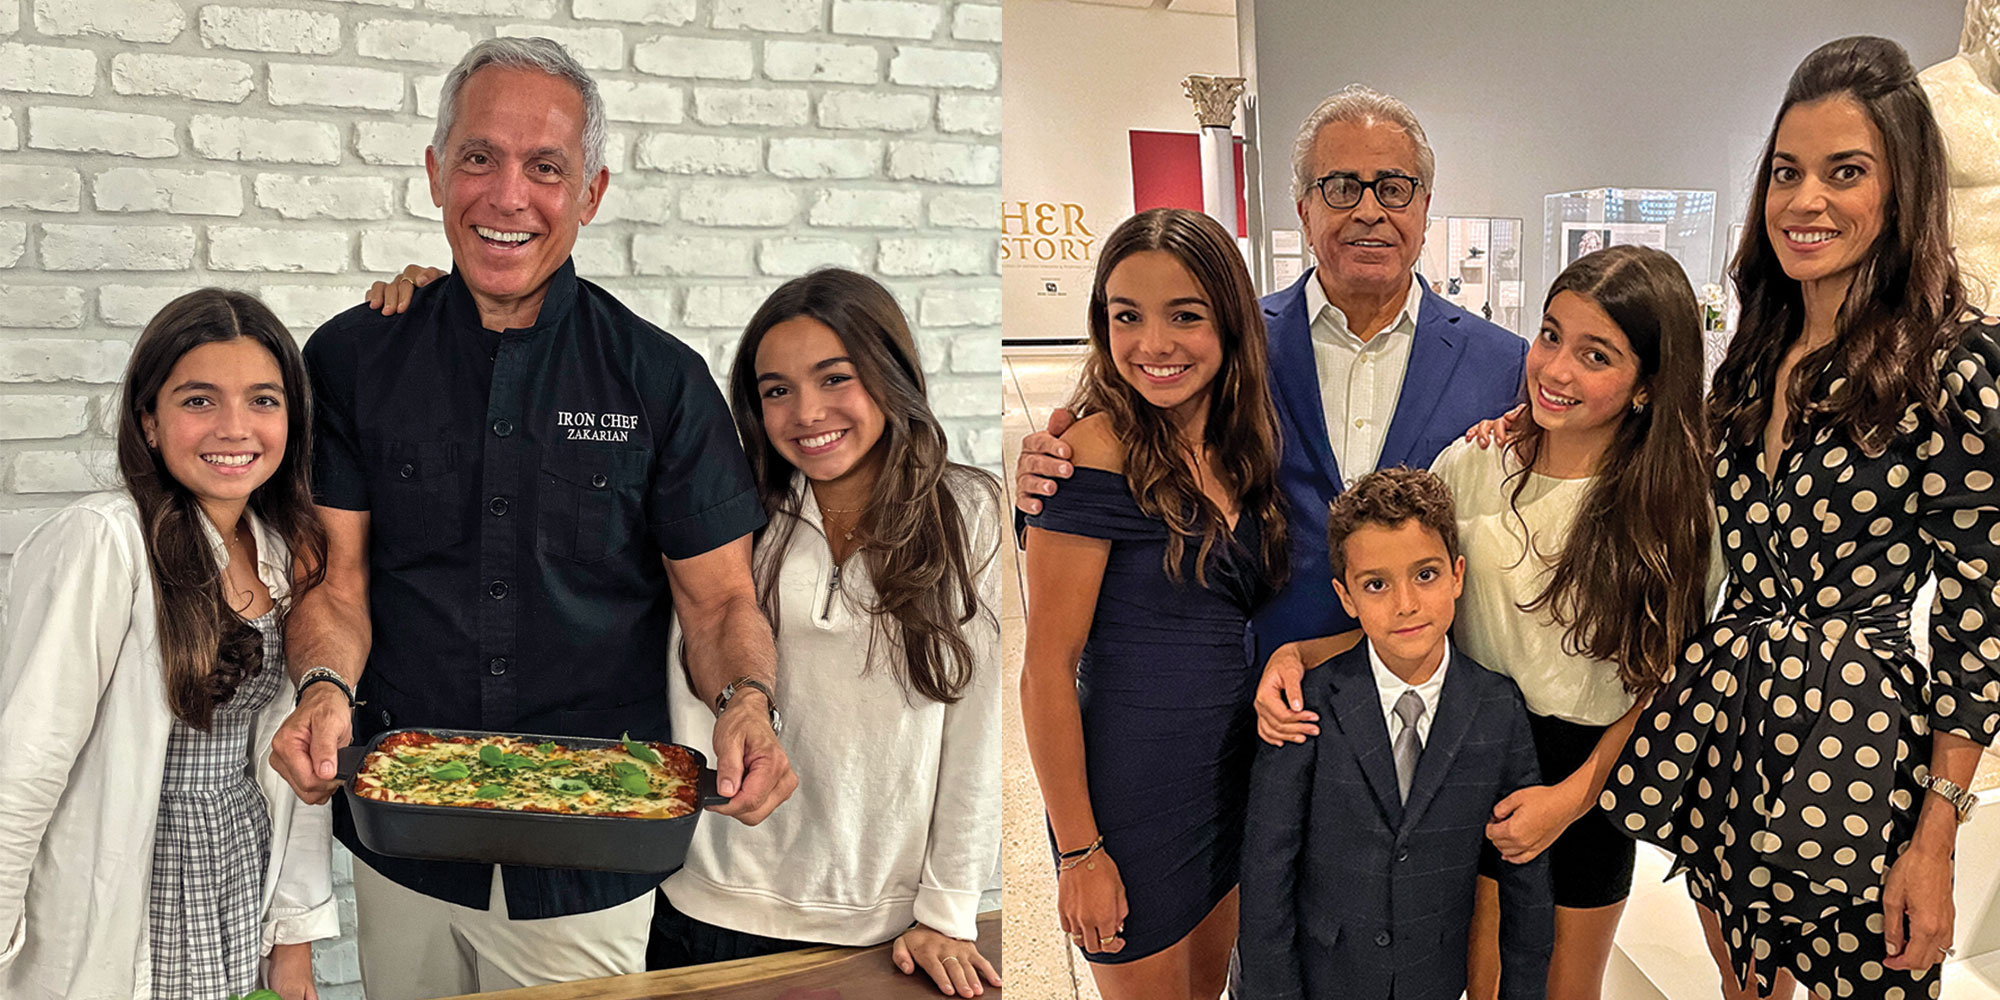 Geoffrey Zakarian is pictured on set earlier this year with his daughters, Anna and Madeline, who co-authored a cookbook (left). Margaret Zakarian is shown with her father, Francis Williams, and her children, Madeline, George and Anna, at the Tampa Museum of Art in 2021 (right).